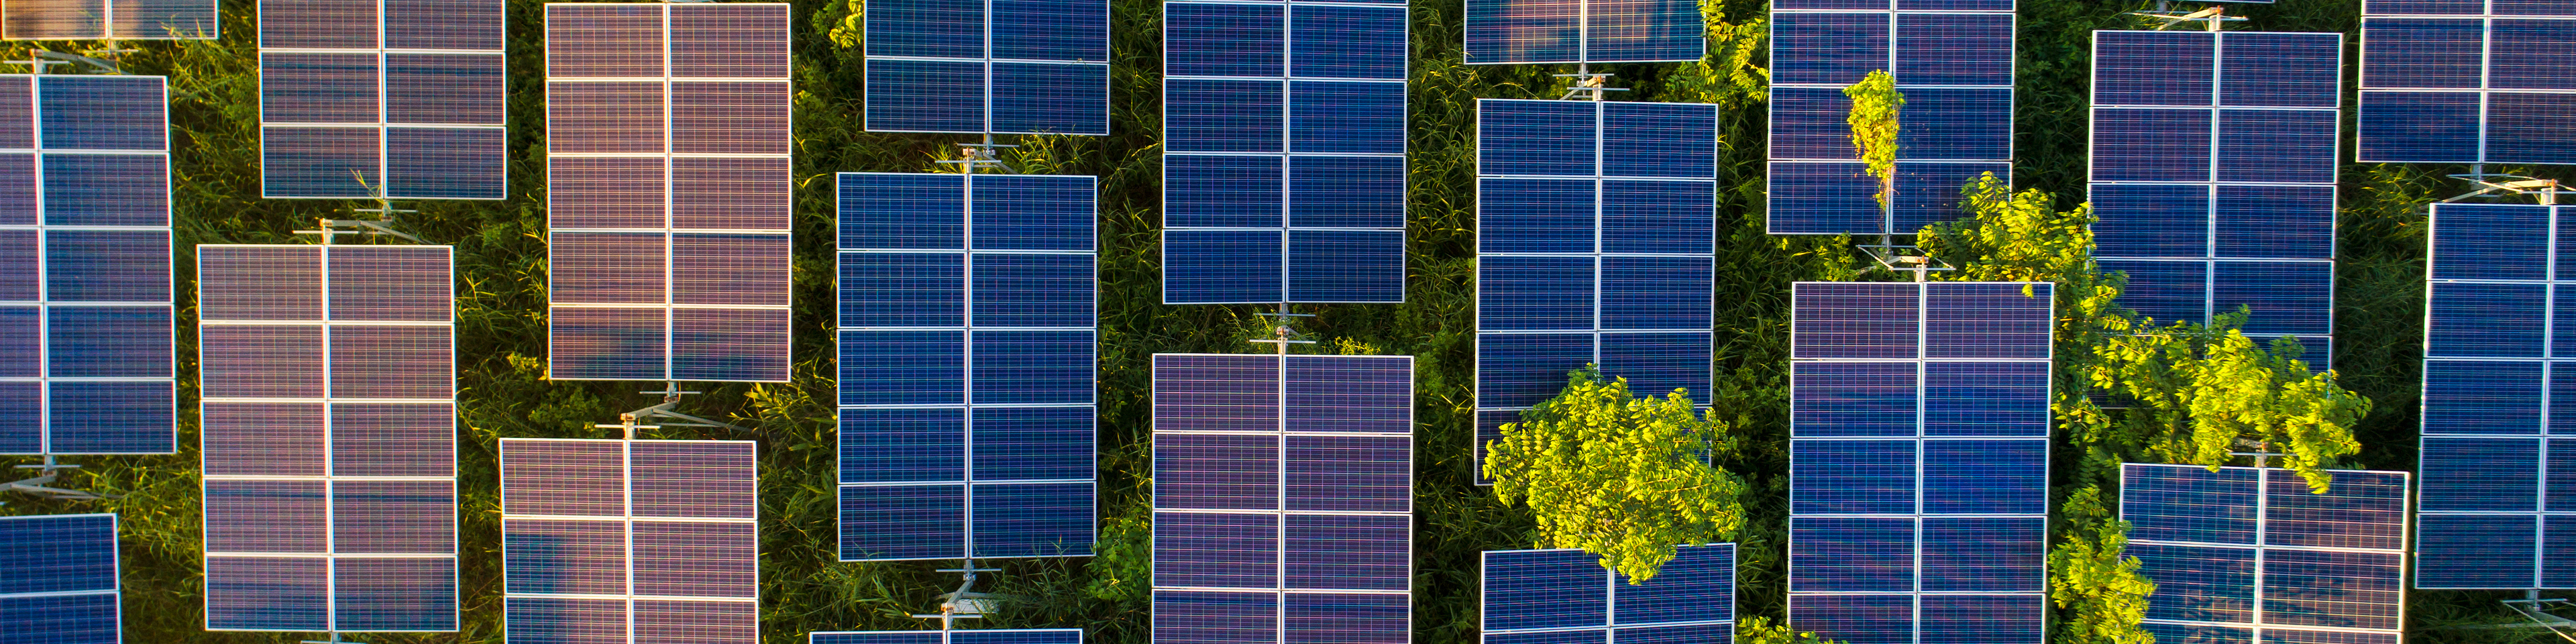 A lender's guide to the solar lien process